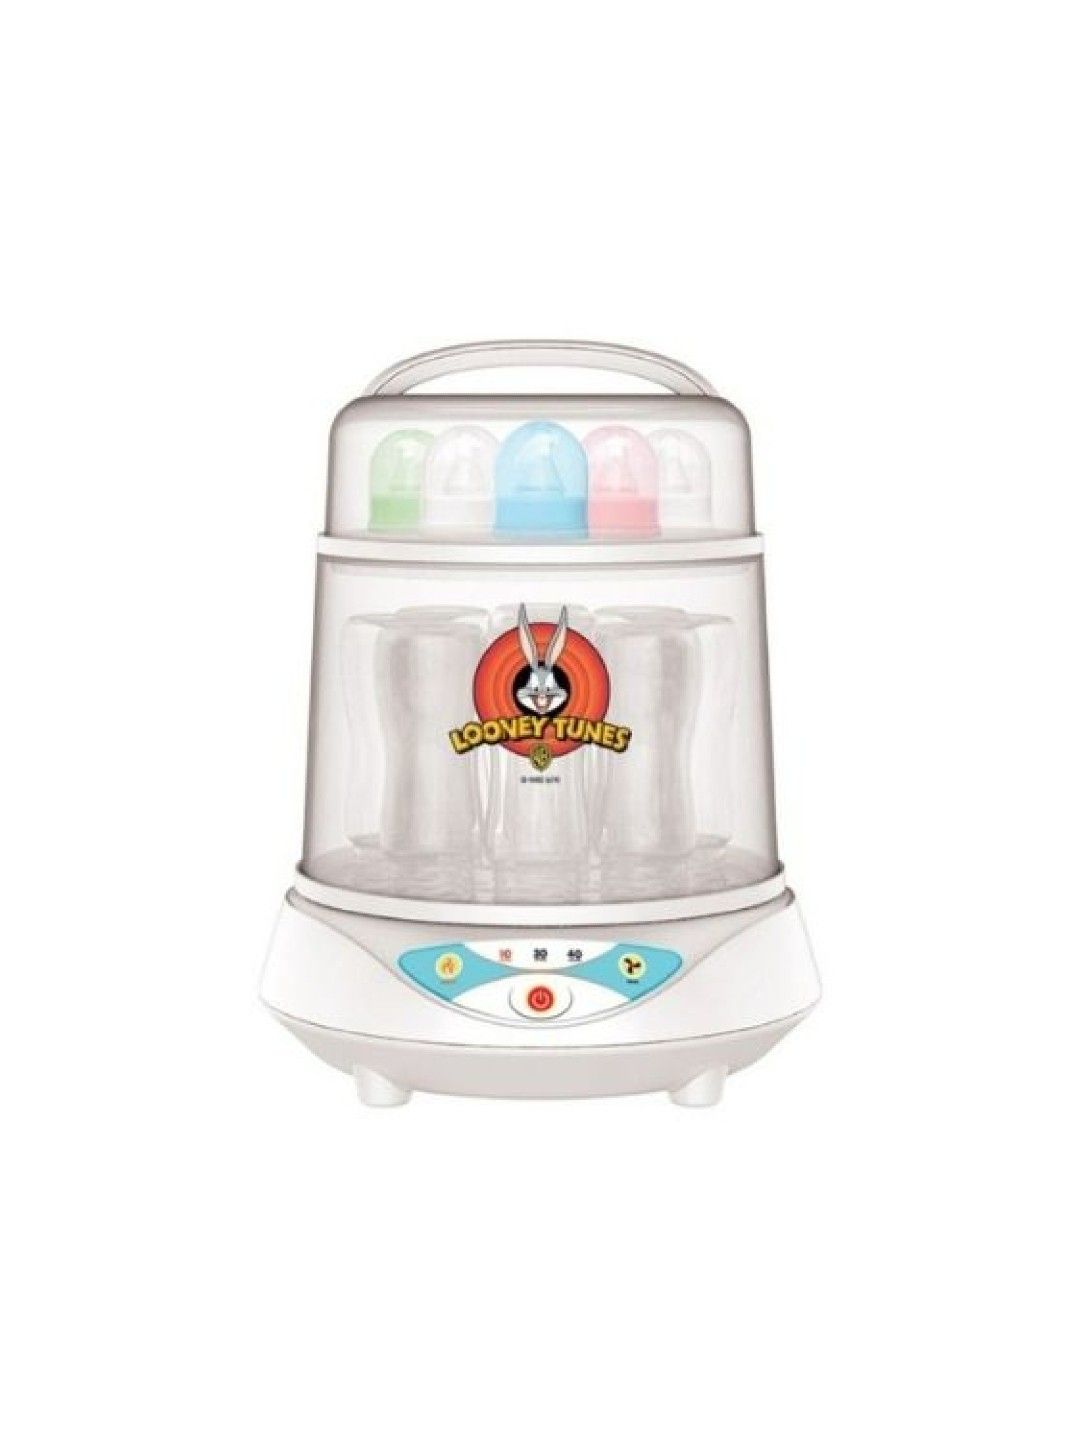 Looney Tunes Touch Panel Sterilizer with Dryer Function